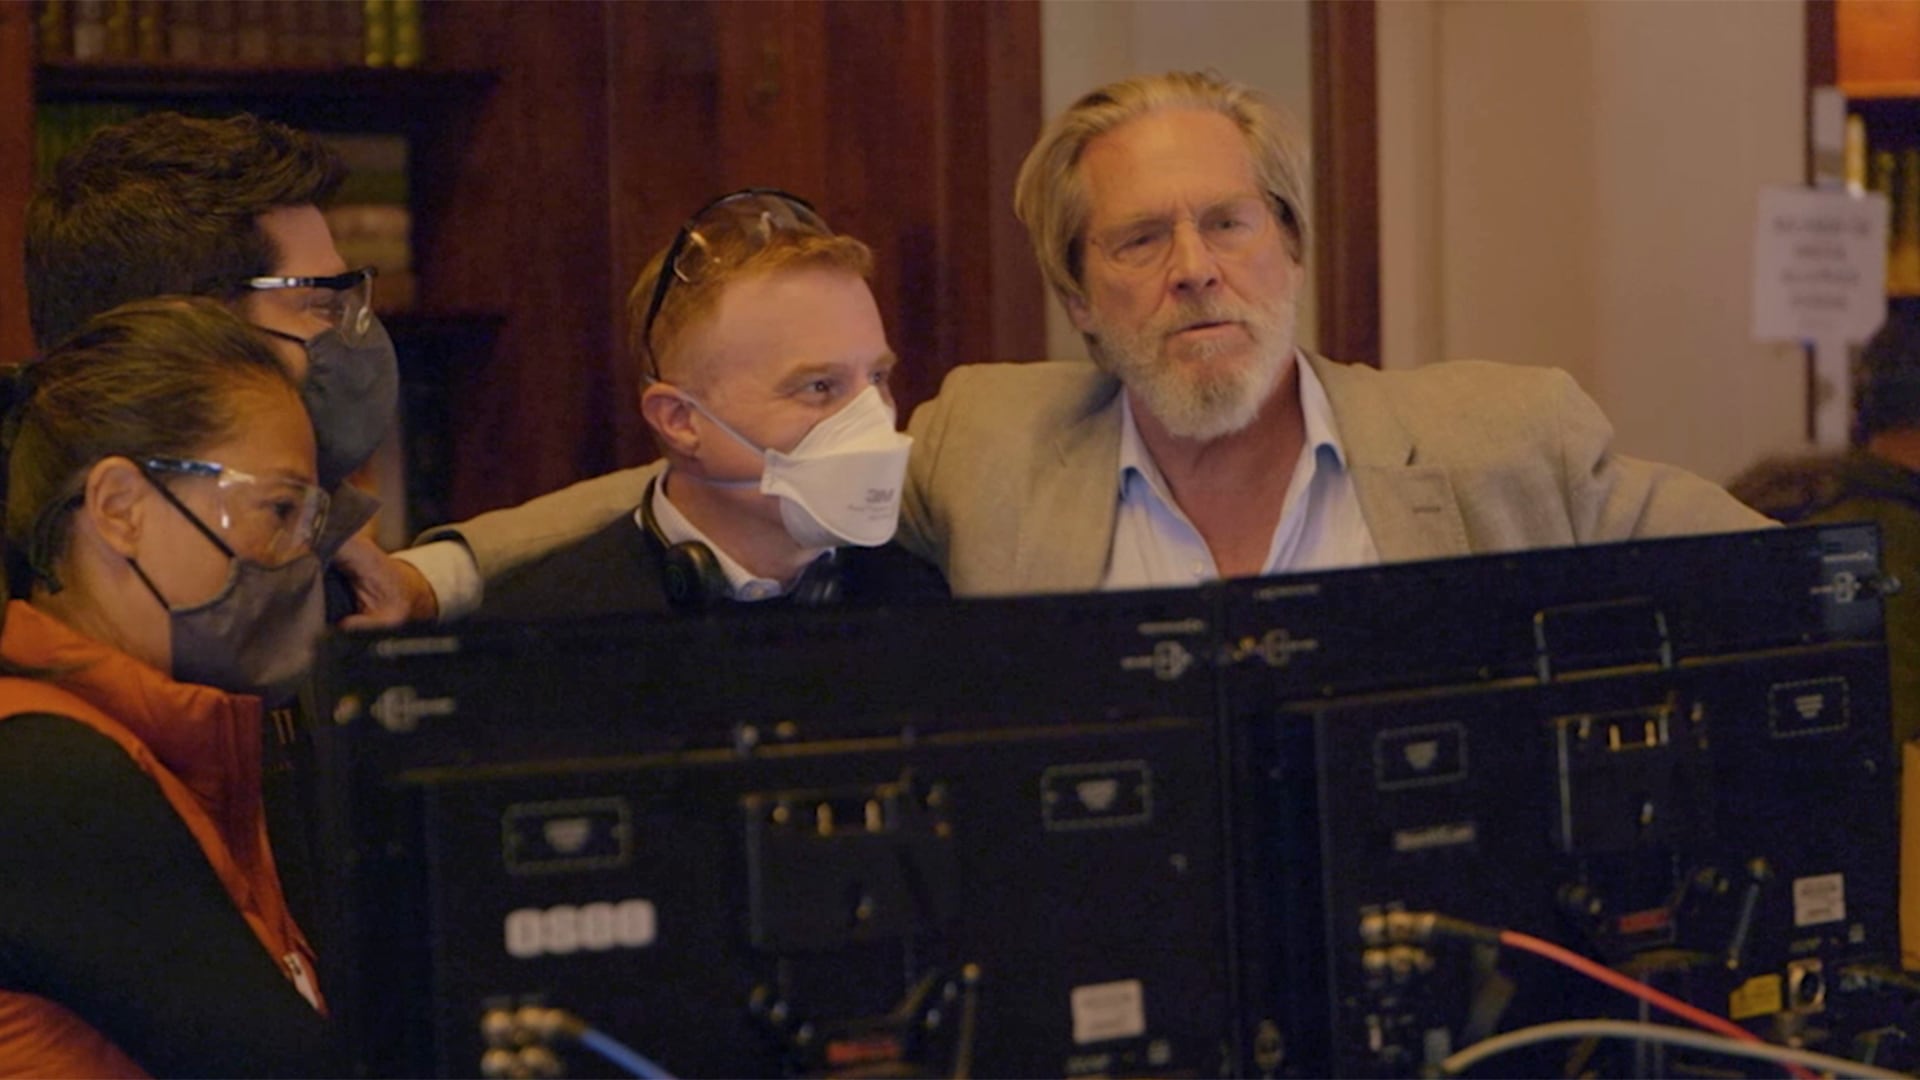 Jeff Bridges wrapping his arm around a crew member standing behind computers